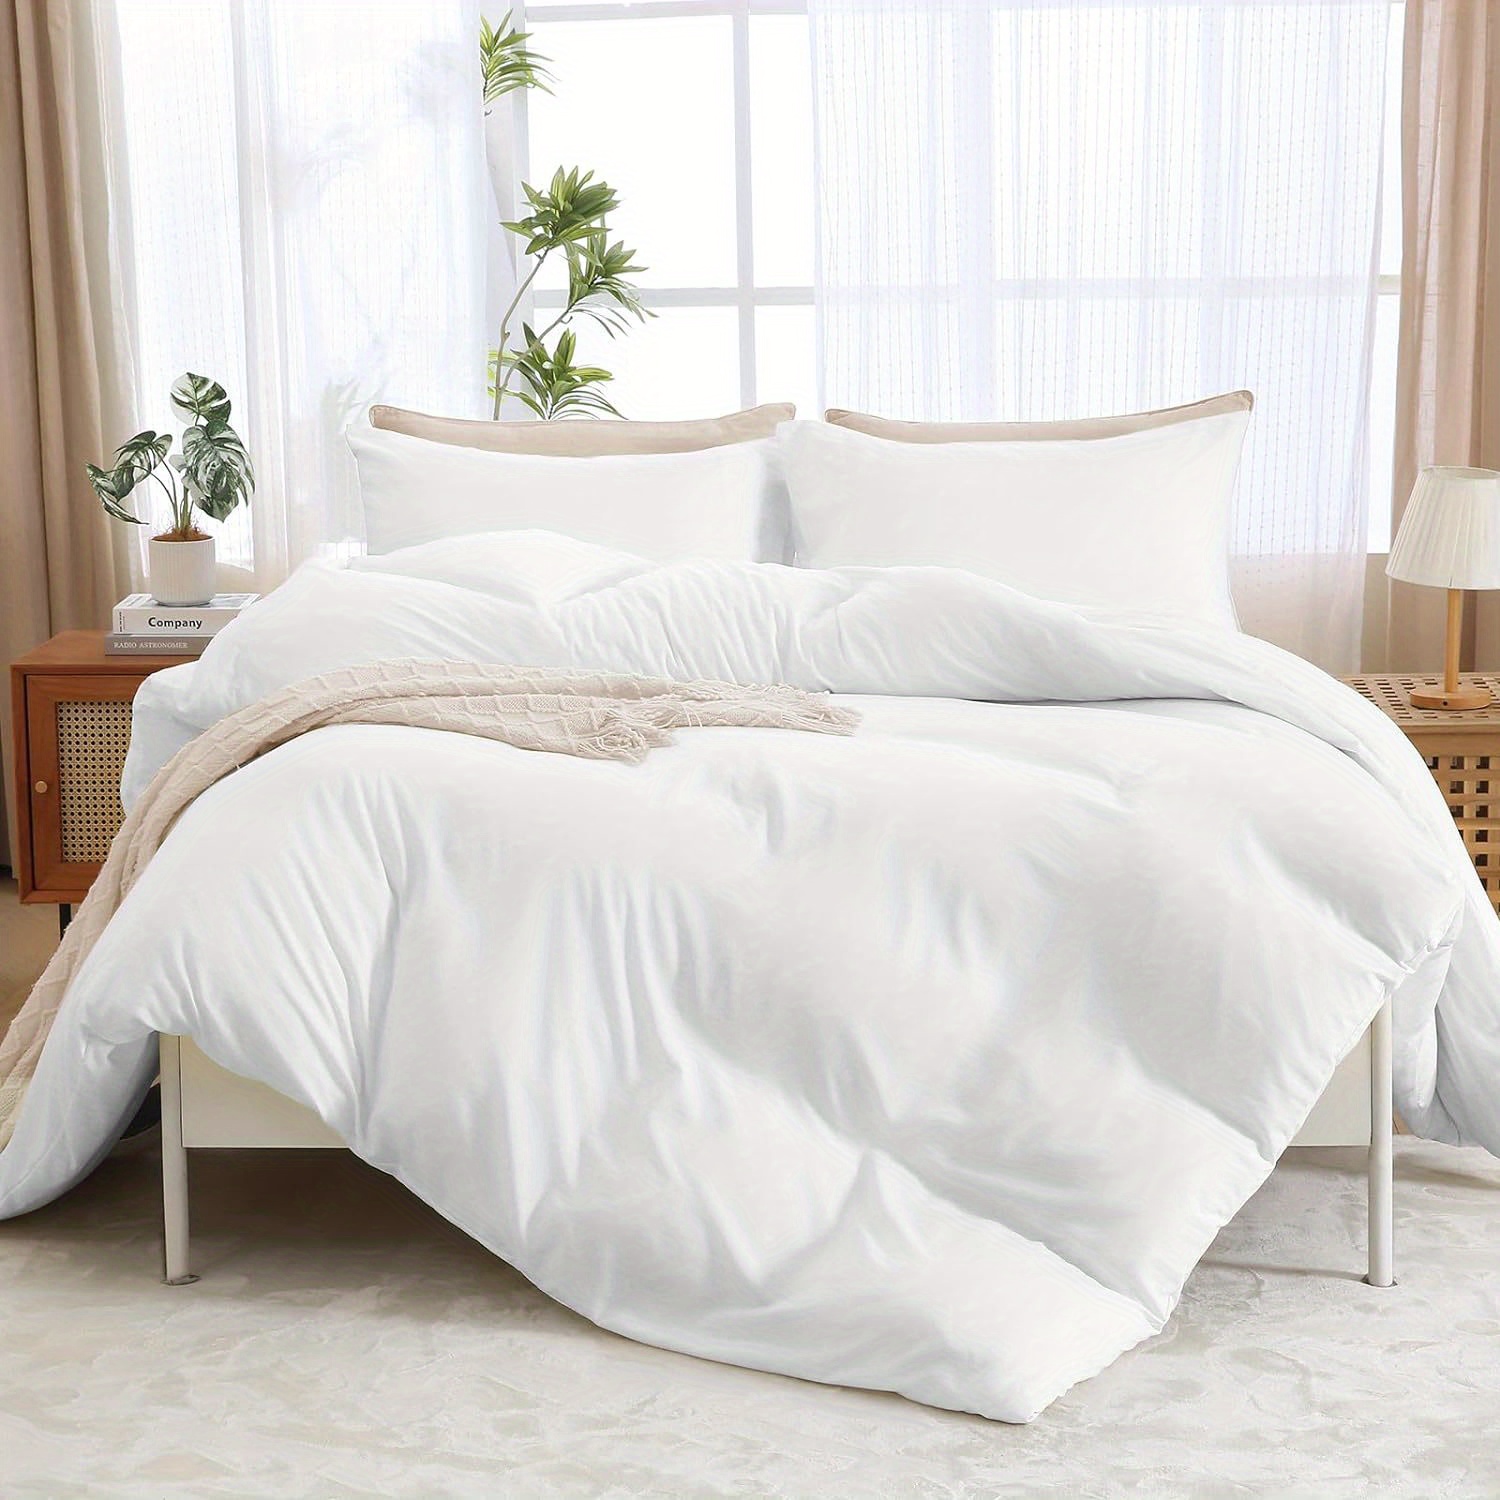 

Soft Double Brushed Duvet Cover, Duvet Covers Set 3 Pieces, Warm Comforter Cover With Zipper Closure And 2 Pillow Cases